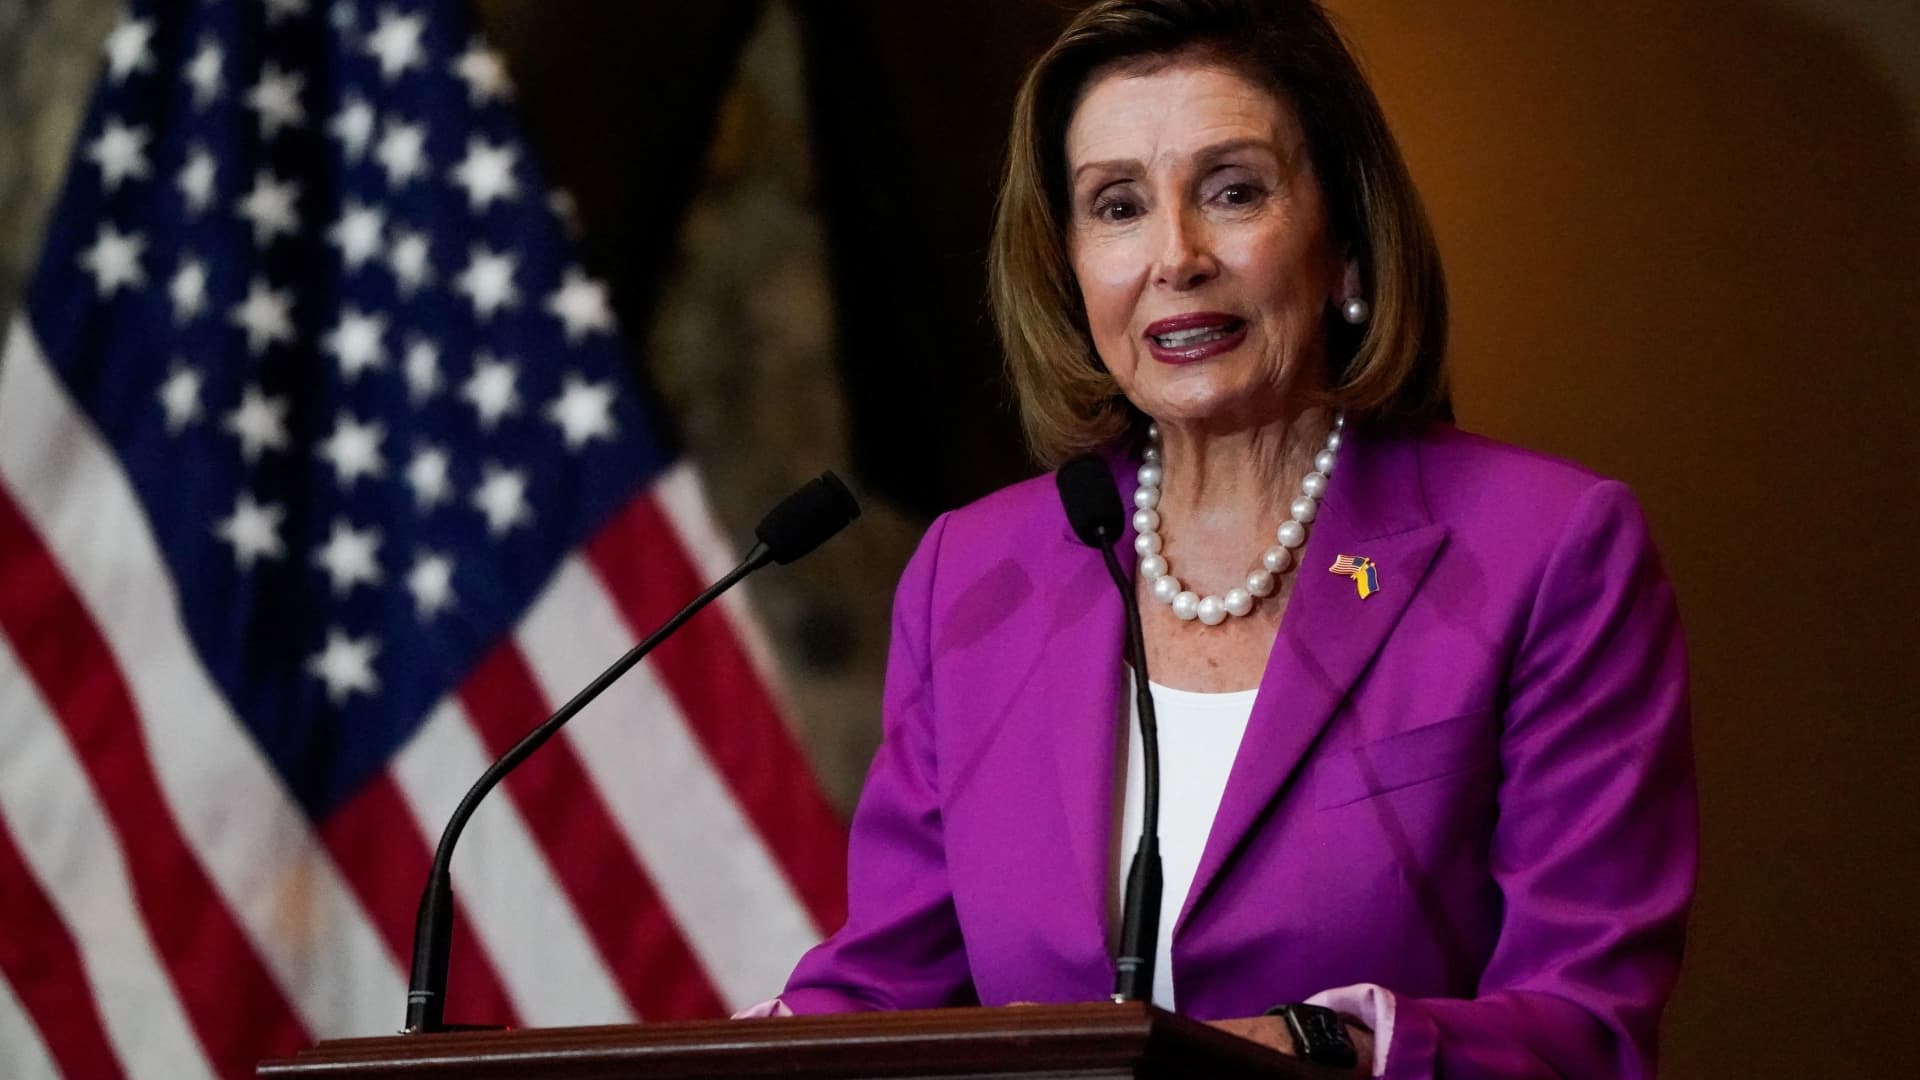 Pelosi confirms trip to Asia, but no mention of Taiwan